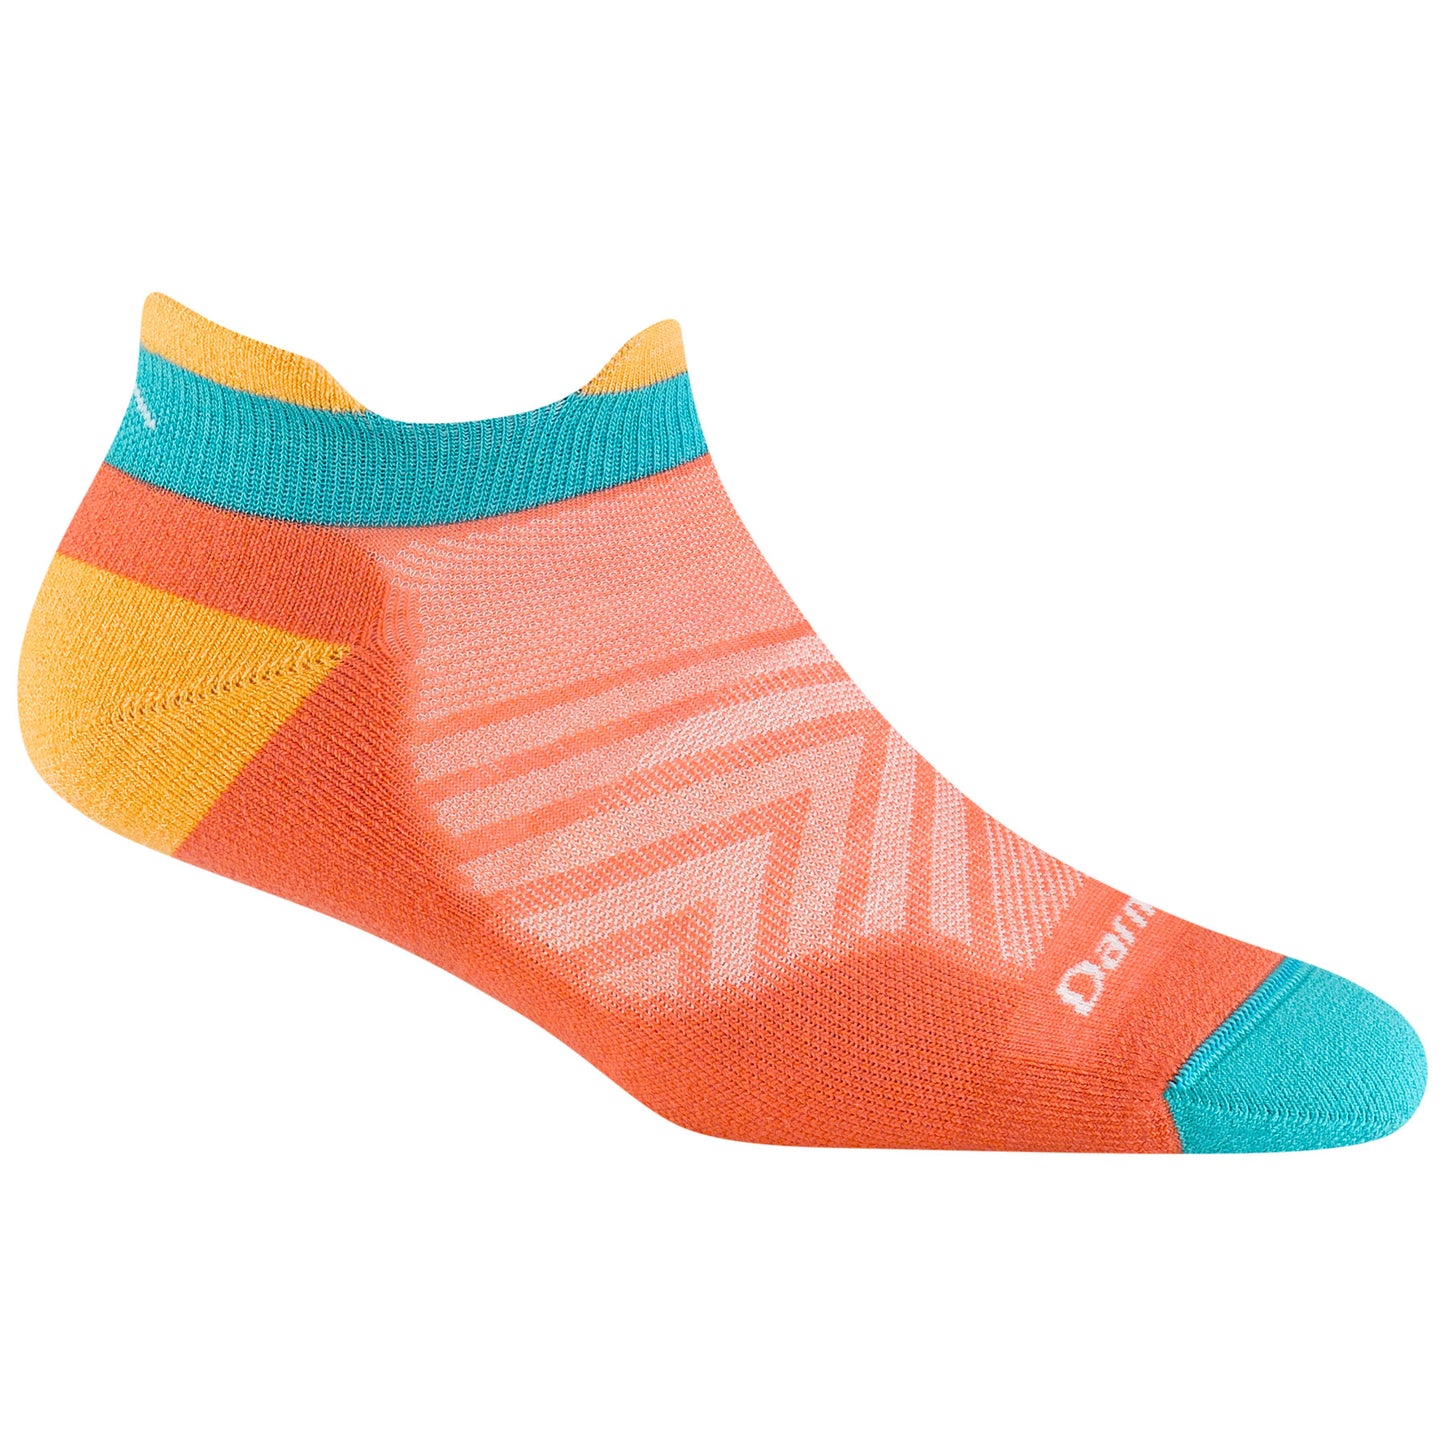 Darn Tough 1047 Reef sock - orange with teal toe and ankle and yellow heel